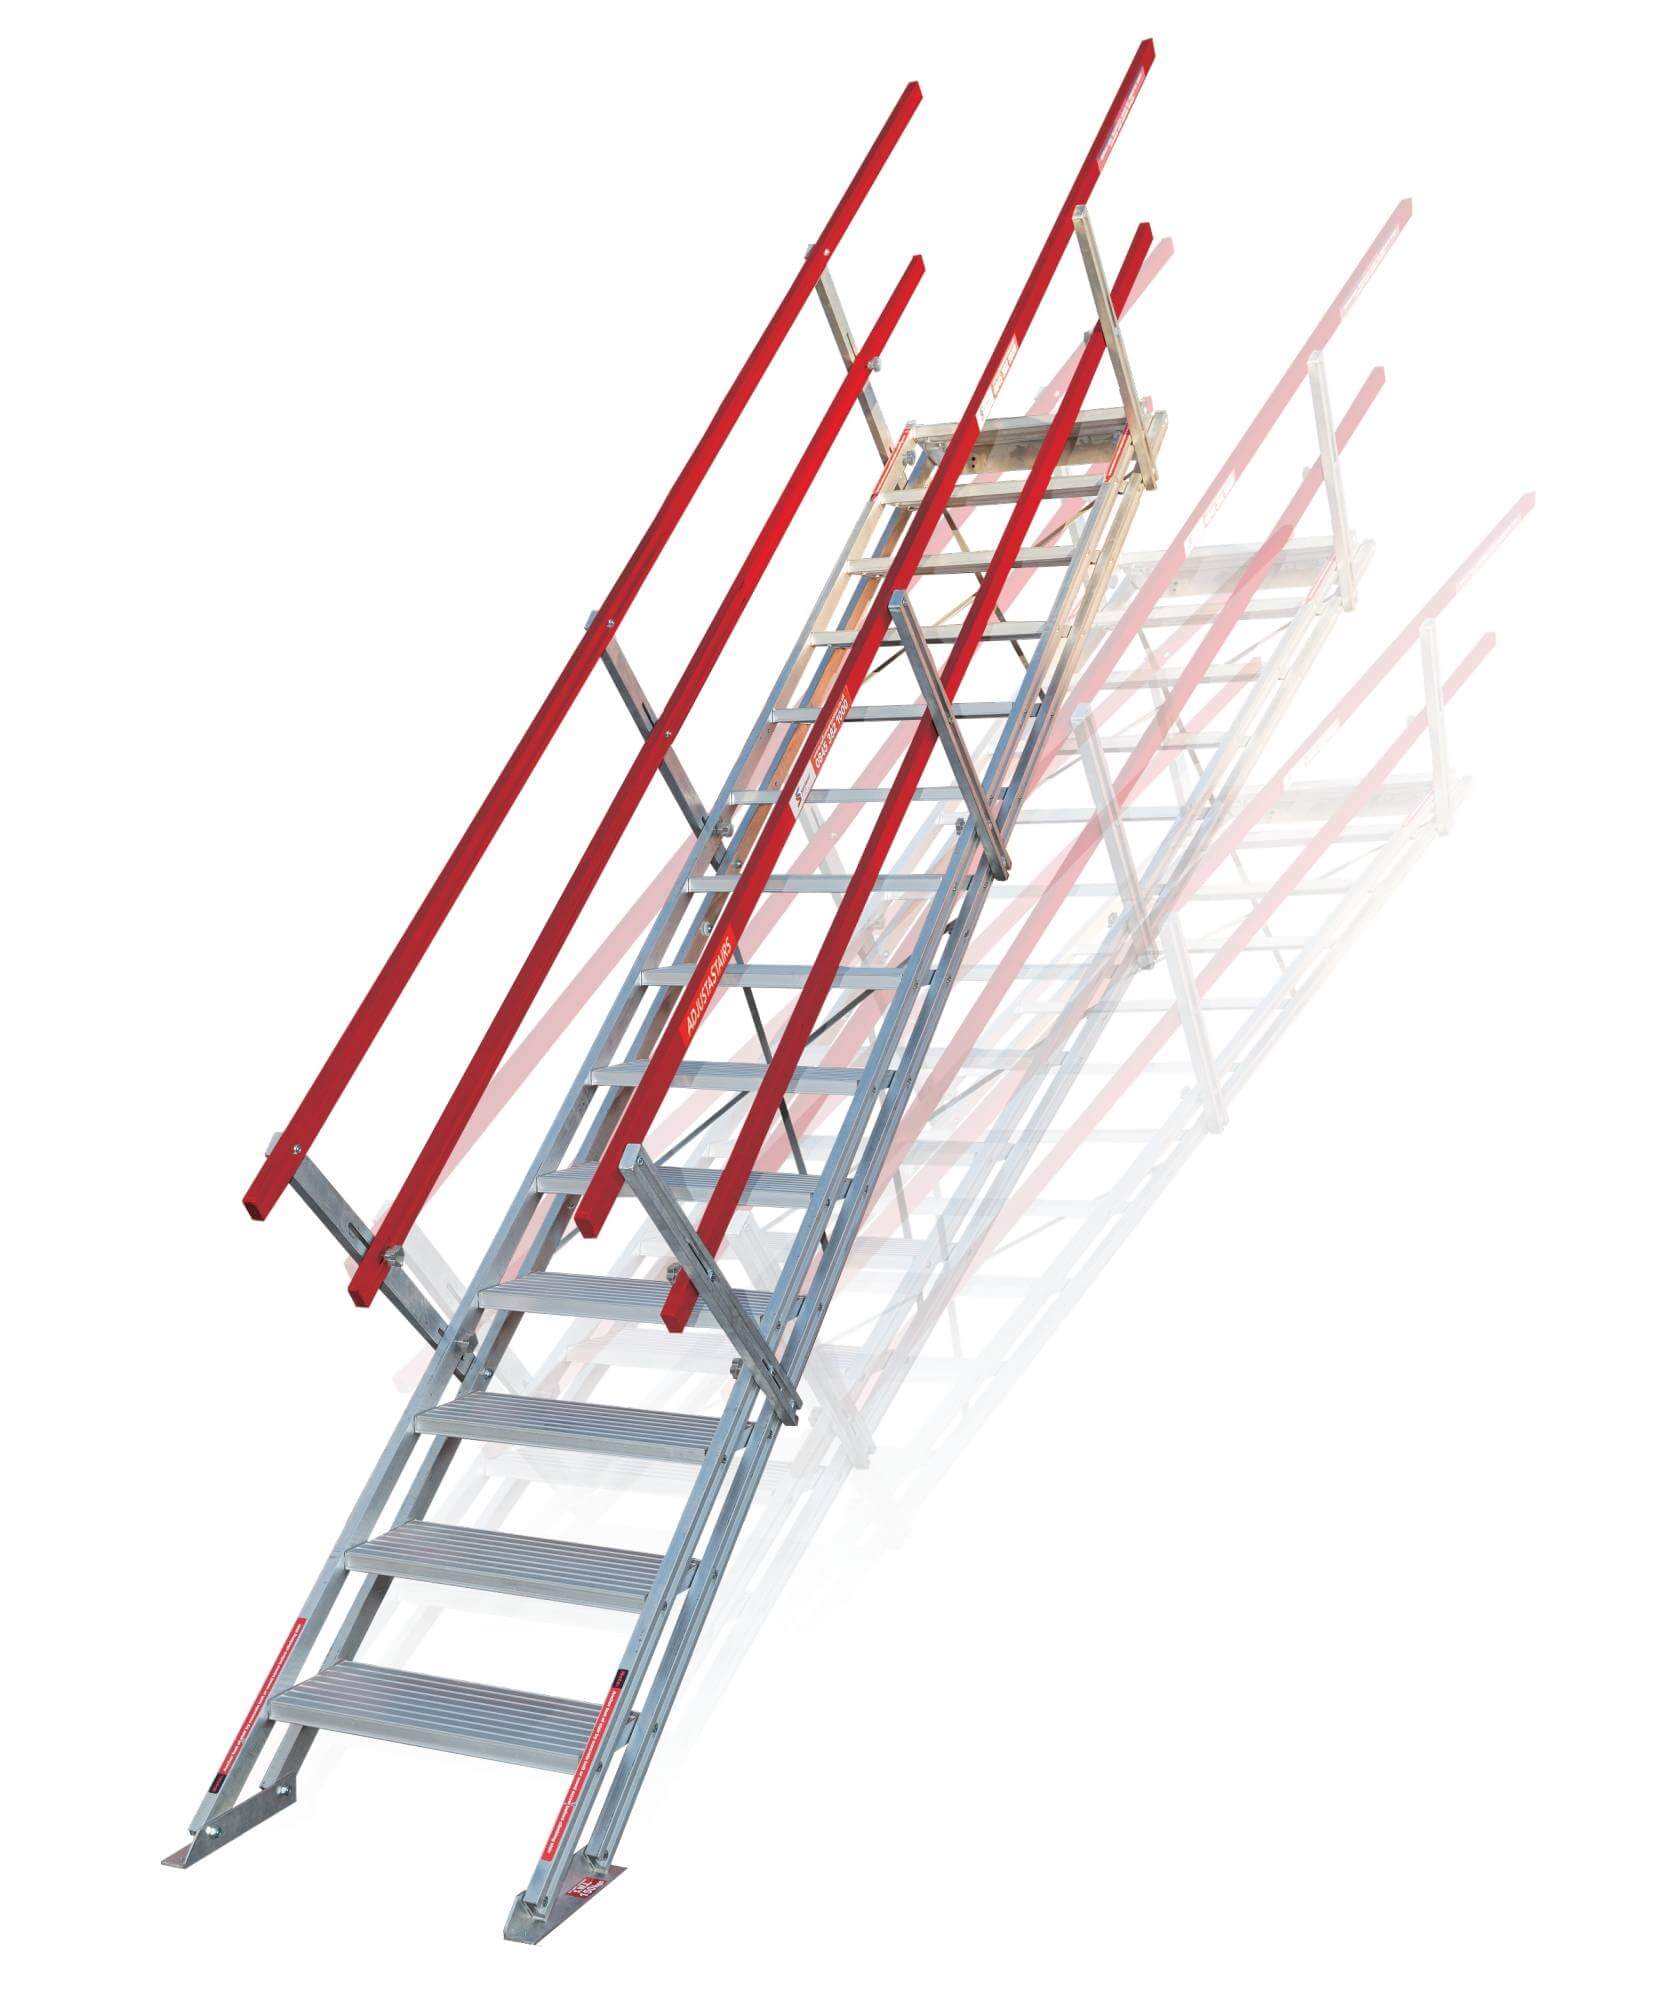 AdjustaStairs - The Smart Solution for Portable Access Stairs